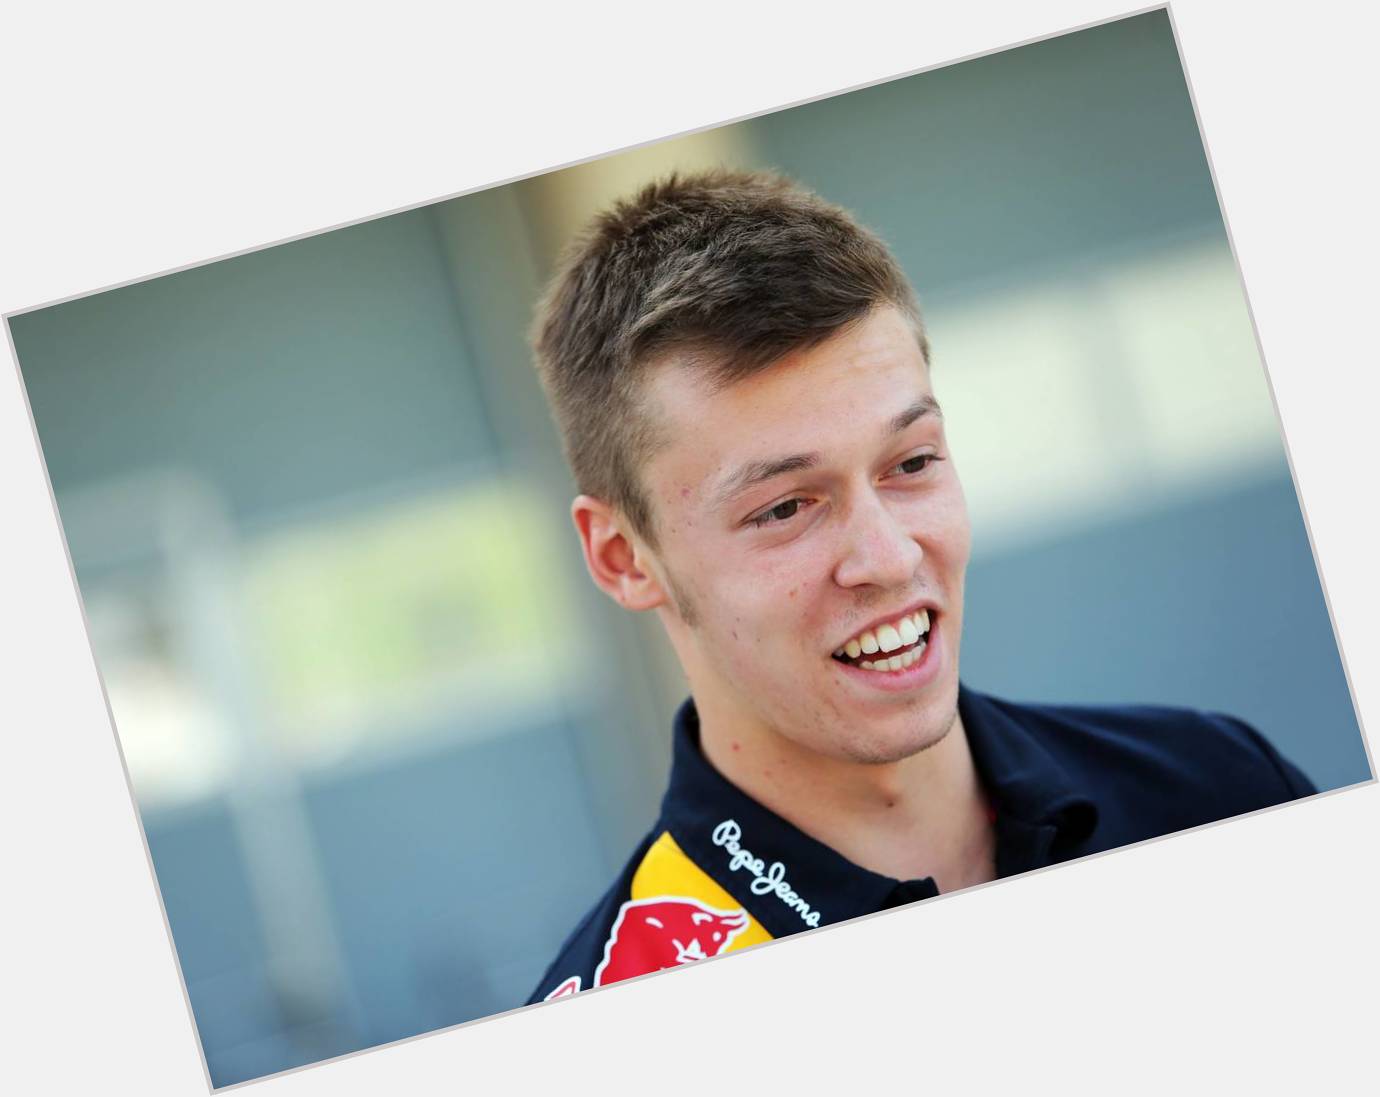 Happy Birthday to Red Bull driver Daniil Kvyat, the ripe old age of 20 today! 